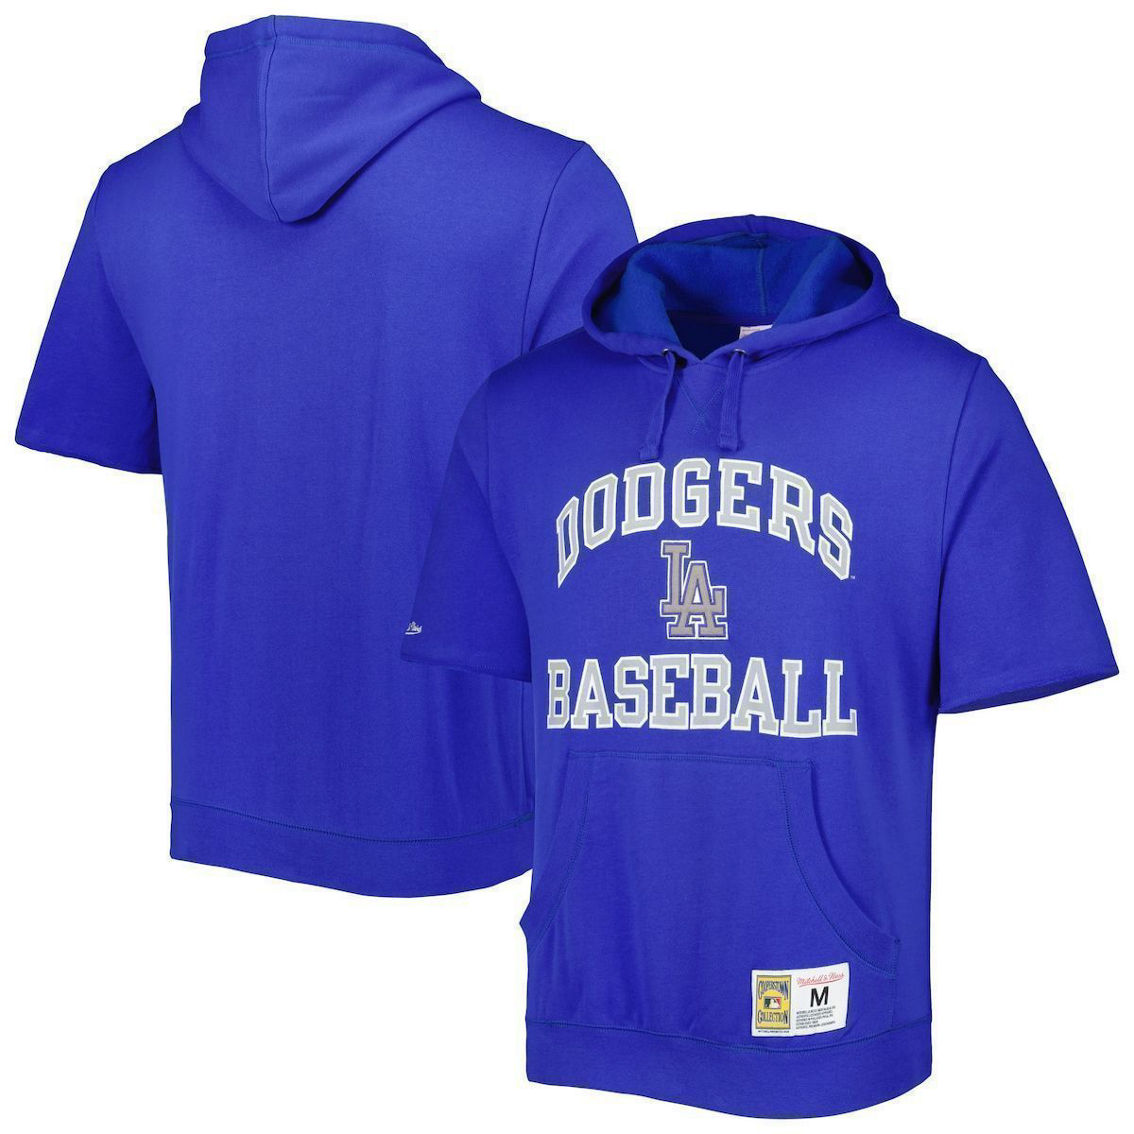 Mitchell & Ness Men's Royal Los Angeles Dodgers Cooperstown Collection Washed Fleece Pullover Short Sleeve Hoodie - Image 2 of 4